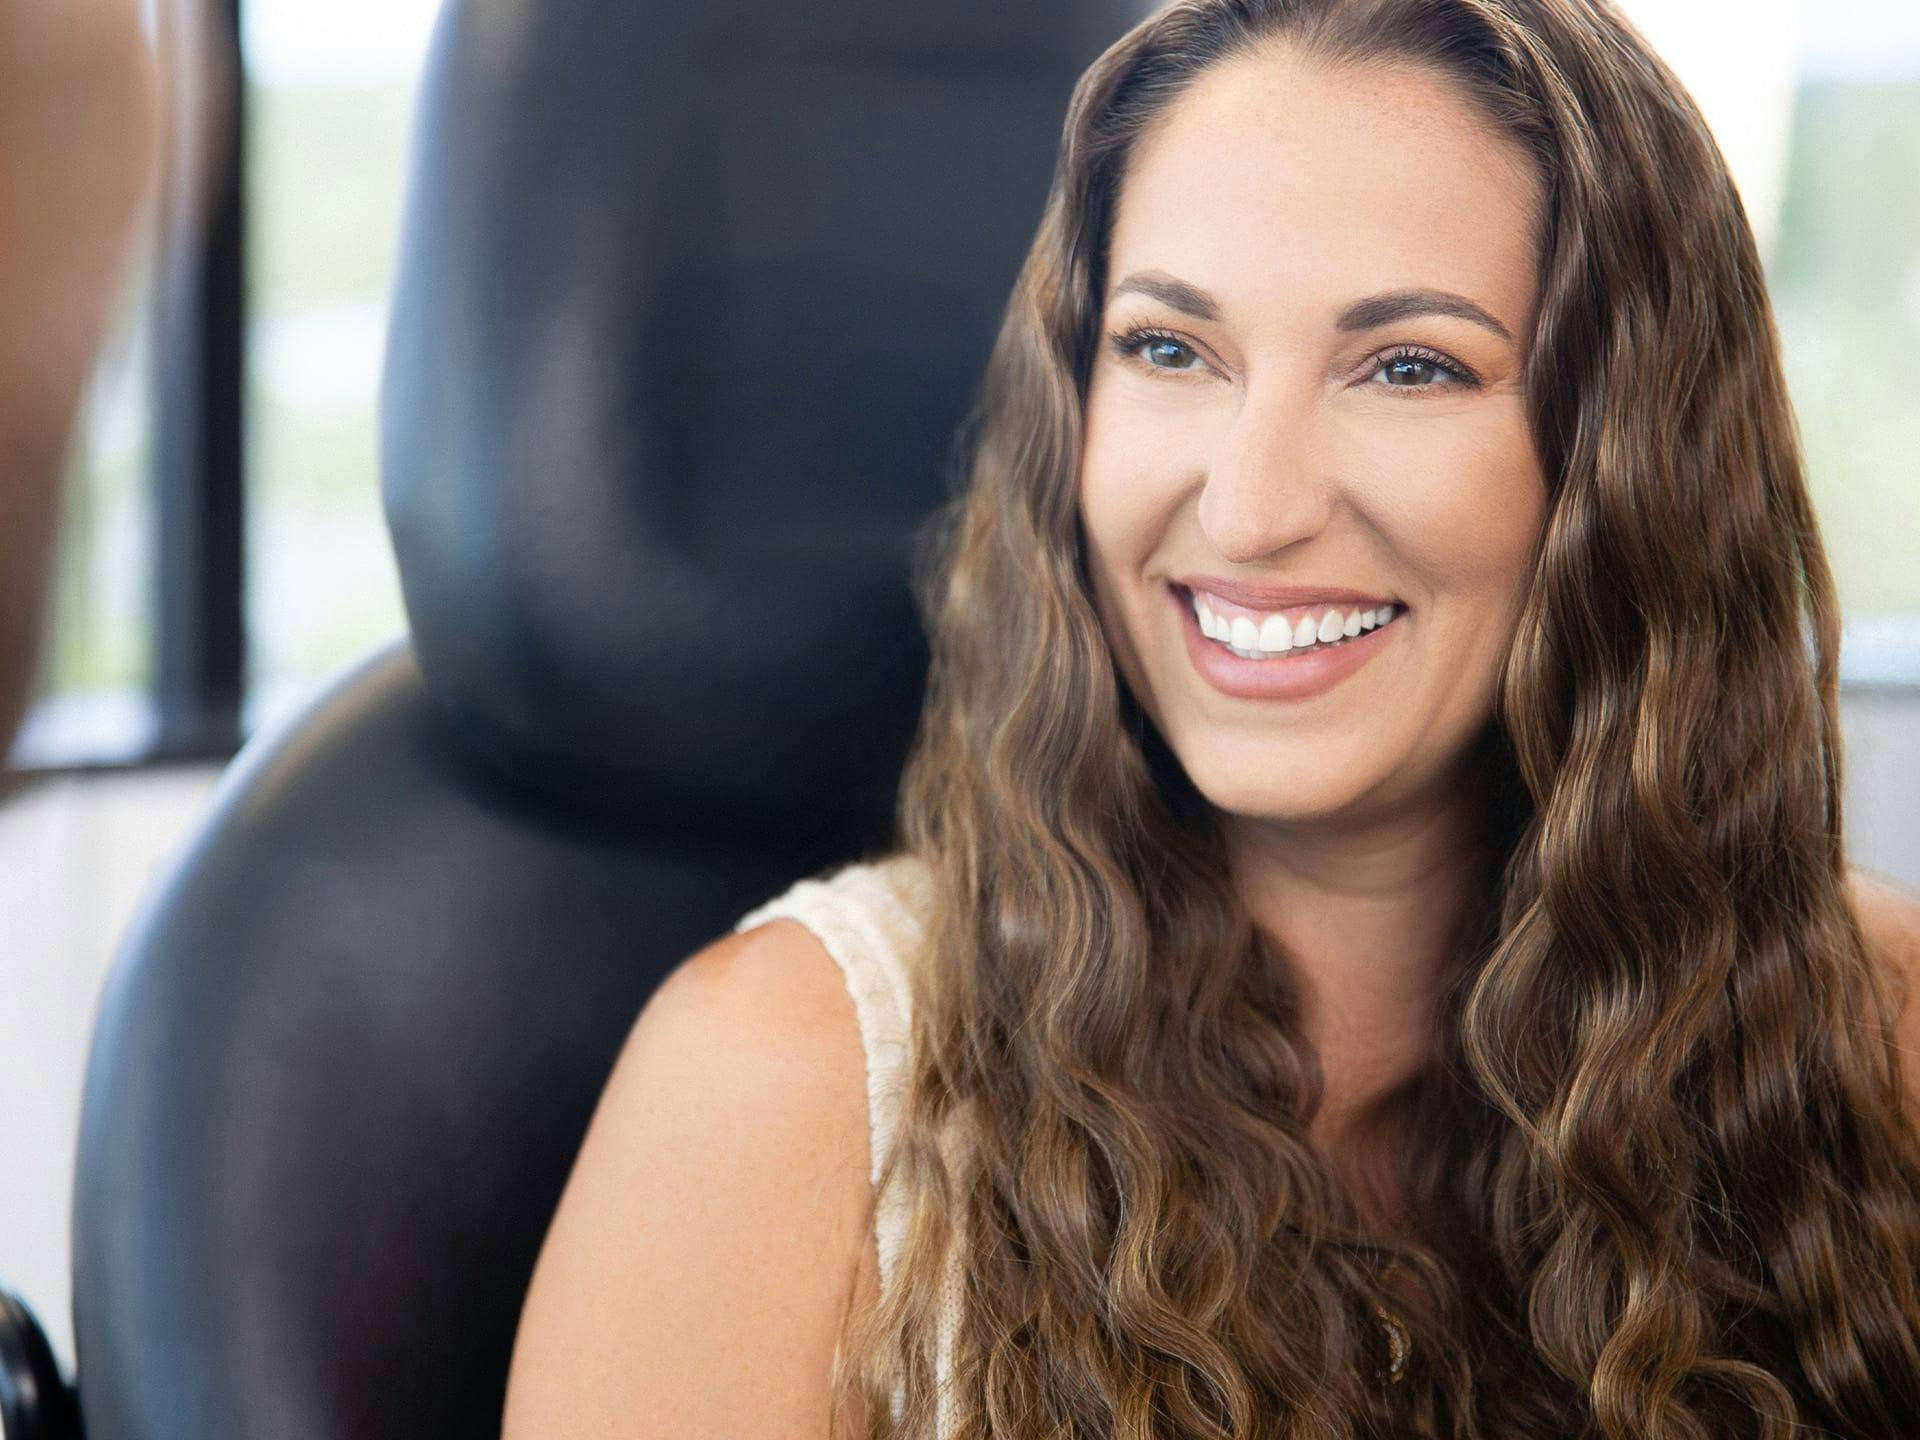 Smiling woman in an office chair